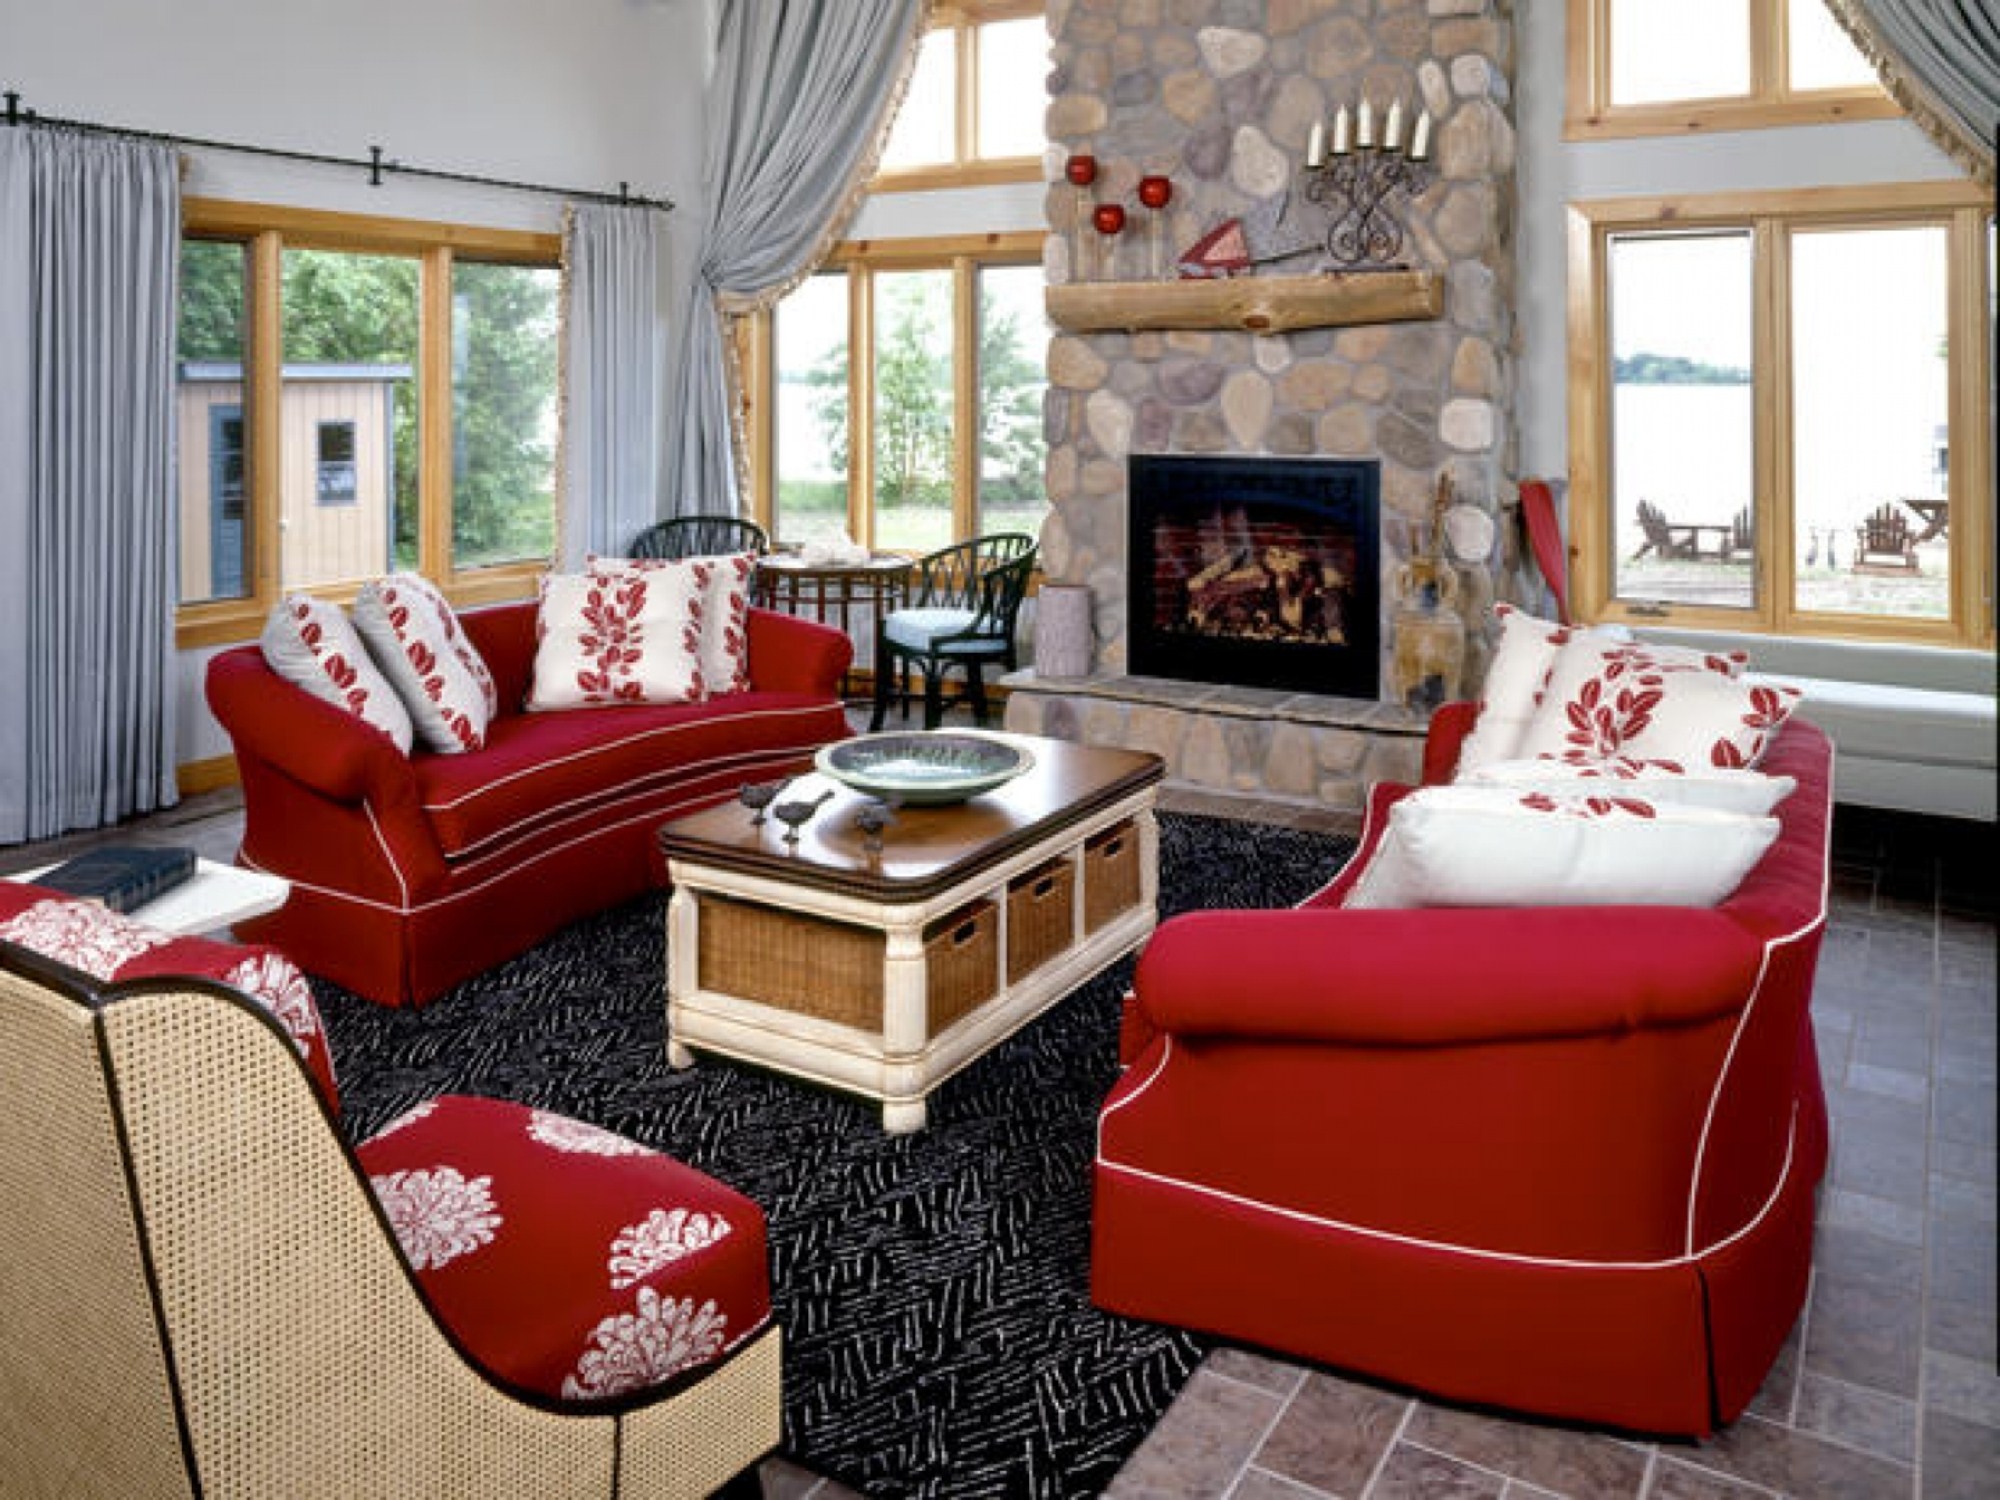 Luxury-Red-Living-Room-Furniture-Decorating-Ideas-On-Home-Remodel-Ideas-with-Red-Living-Room-Furniture-Decorating-Ideas